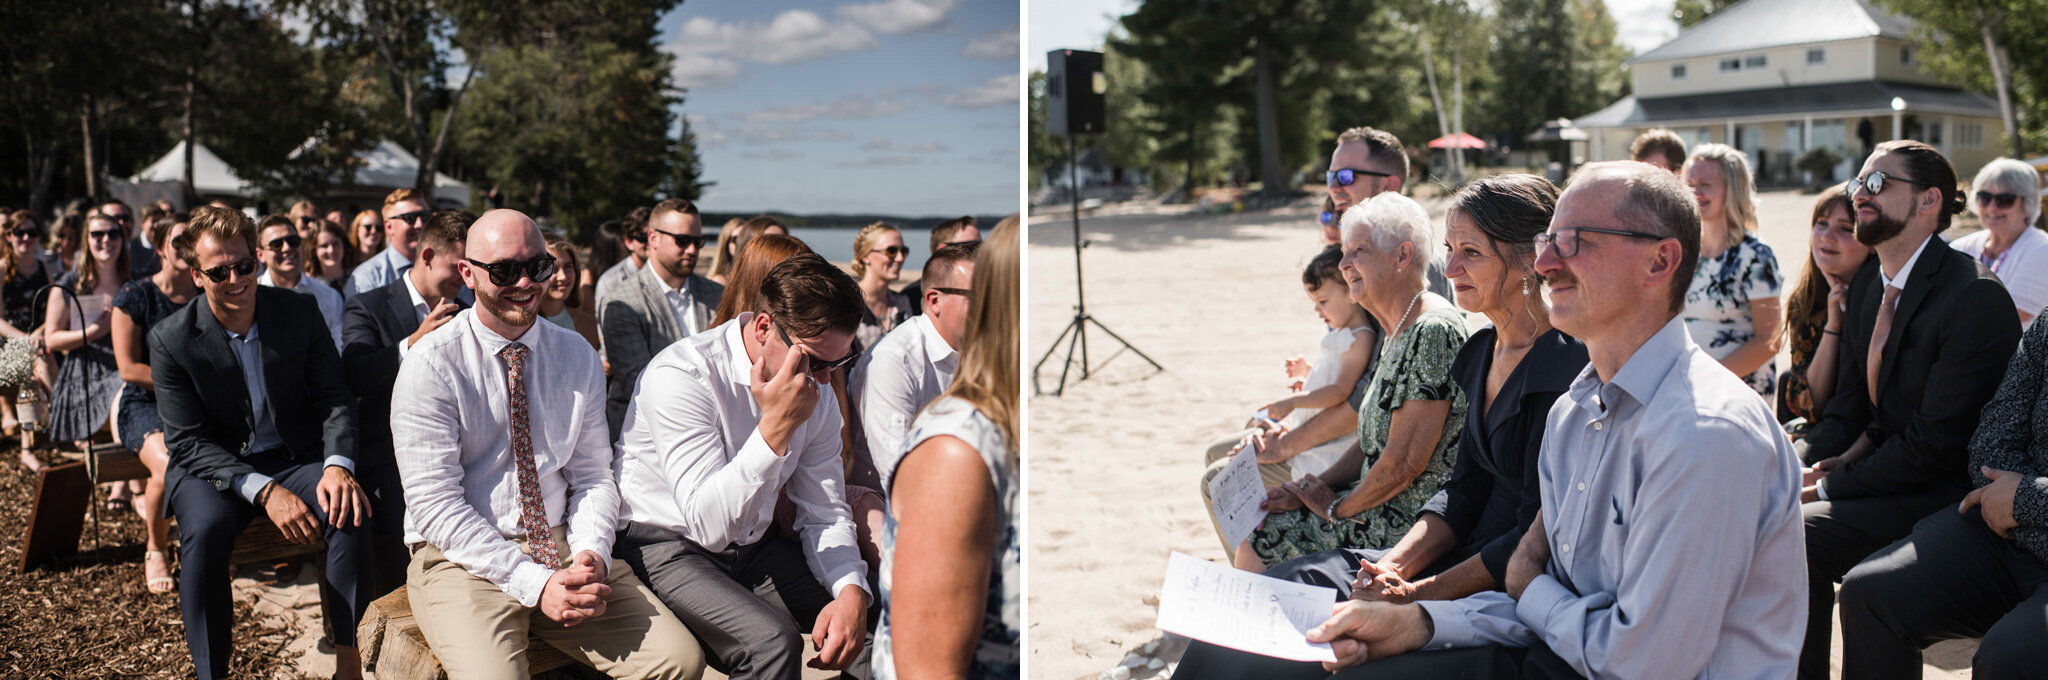 609-guests-reactions-wedding-outdoor-lake-ceremony-cottage-ontario-toronto.jpg